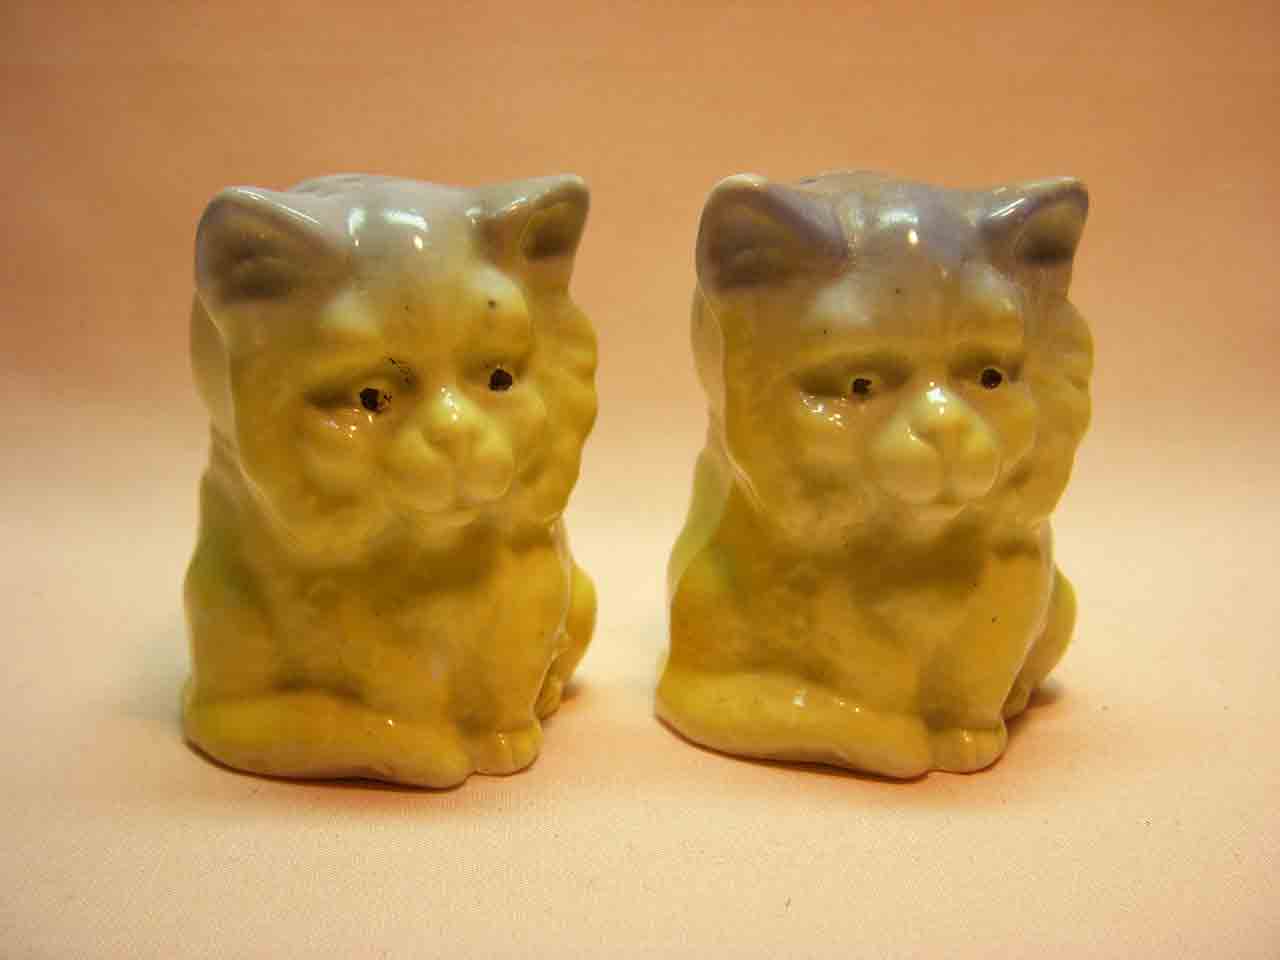 Conta & Boehme Germany cats salt and pepper shakers